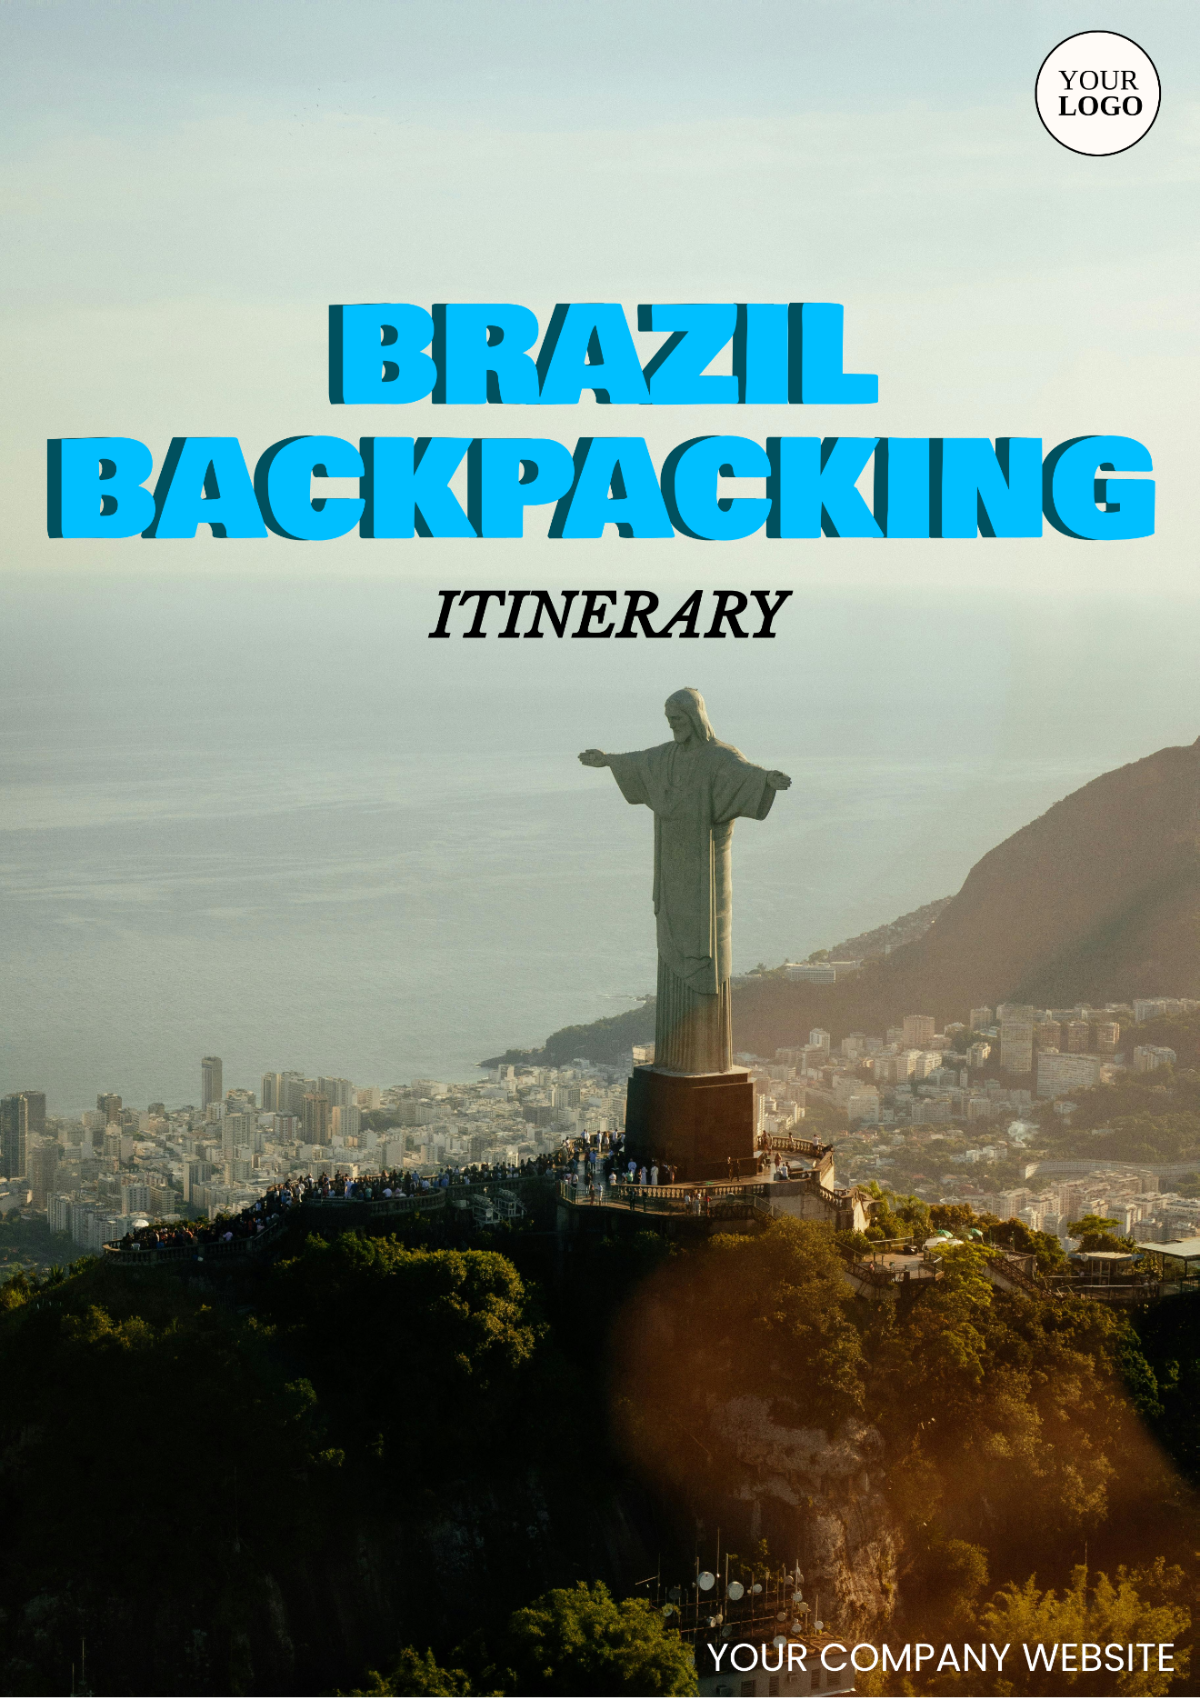 Backpacking Brazil Itinerary Template